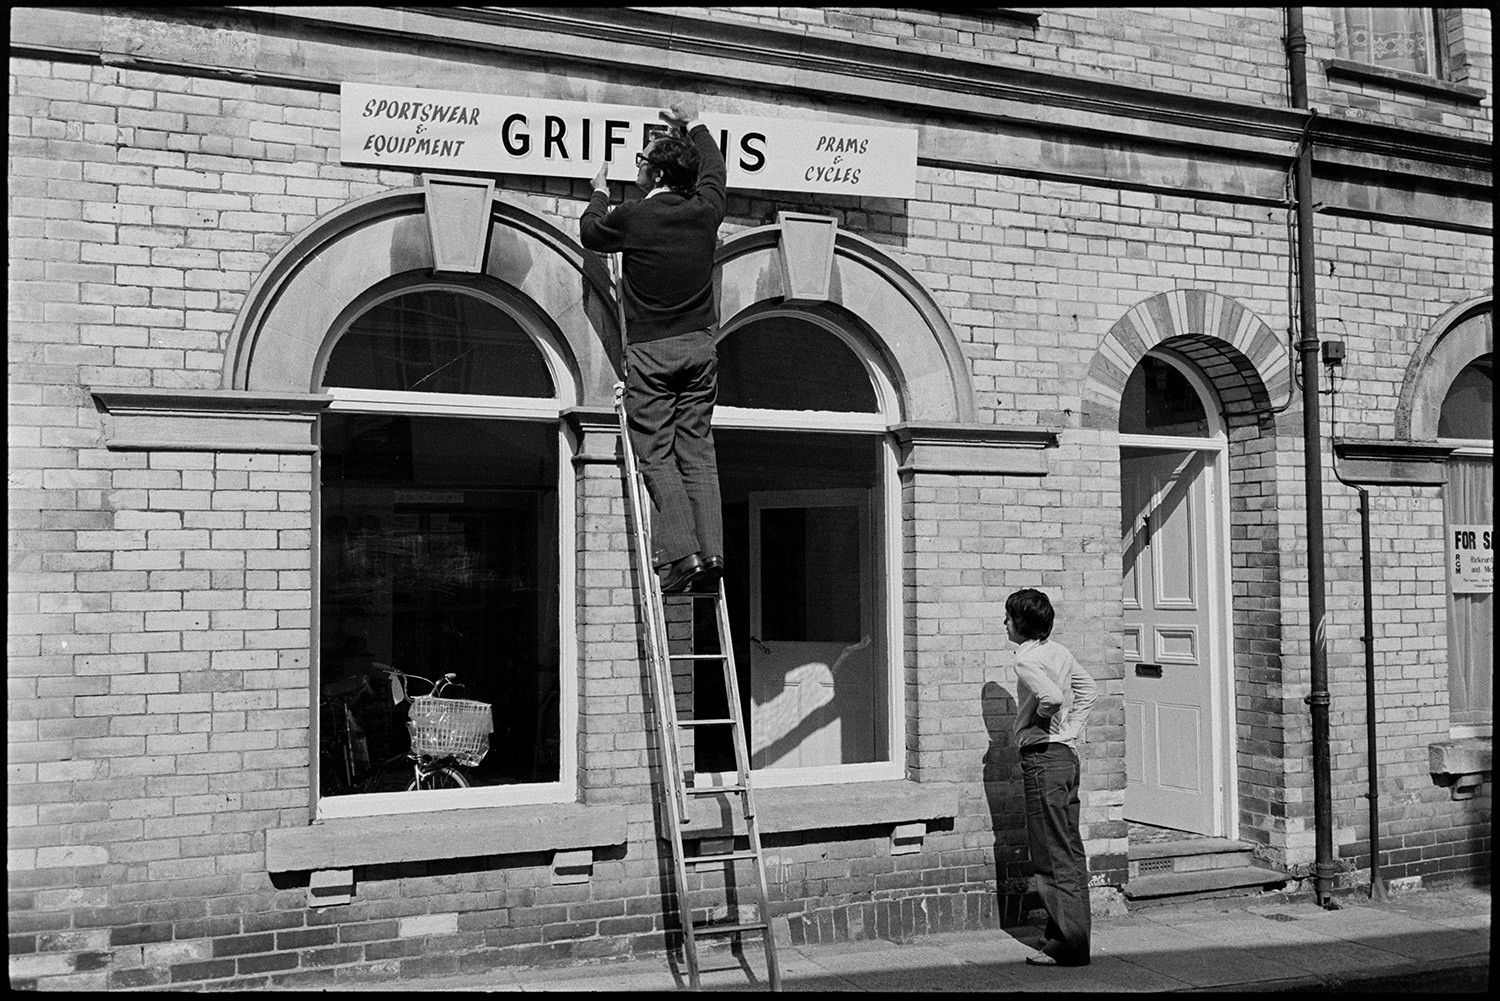 Putting up sign for new shop. 
[A man on a ladder putting up a sign for a new shop, Griffins sports shop, in Torrington. A bicycle ]